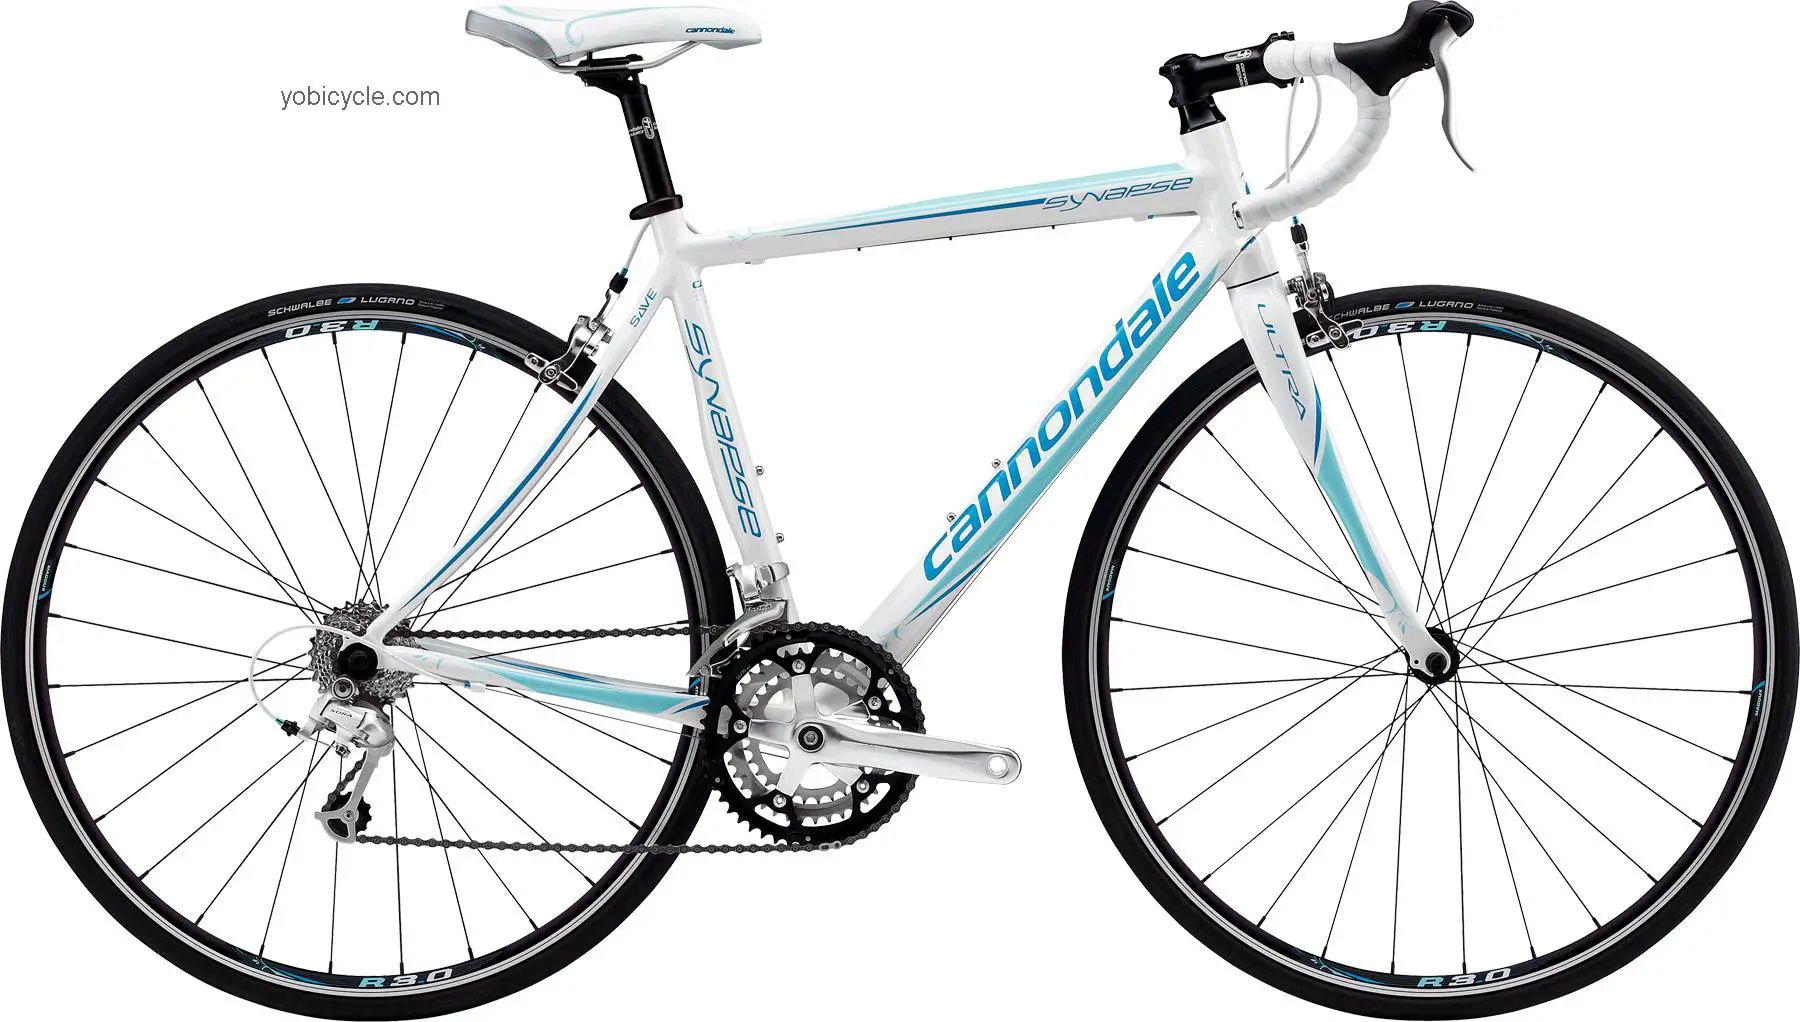 Cannondale Synapse 7 Sora competitors and comparison tool online specs and performance